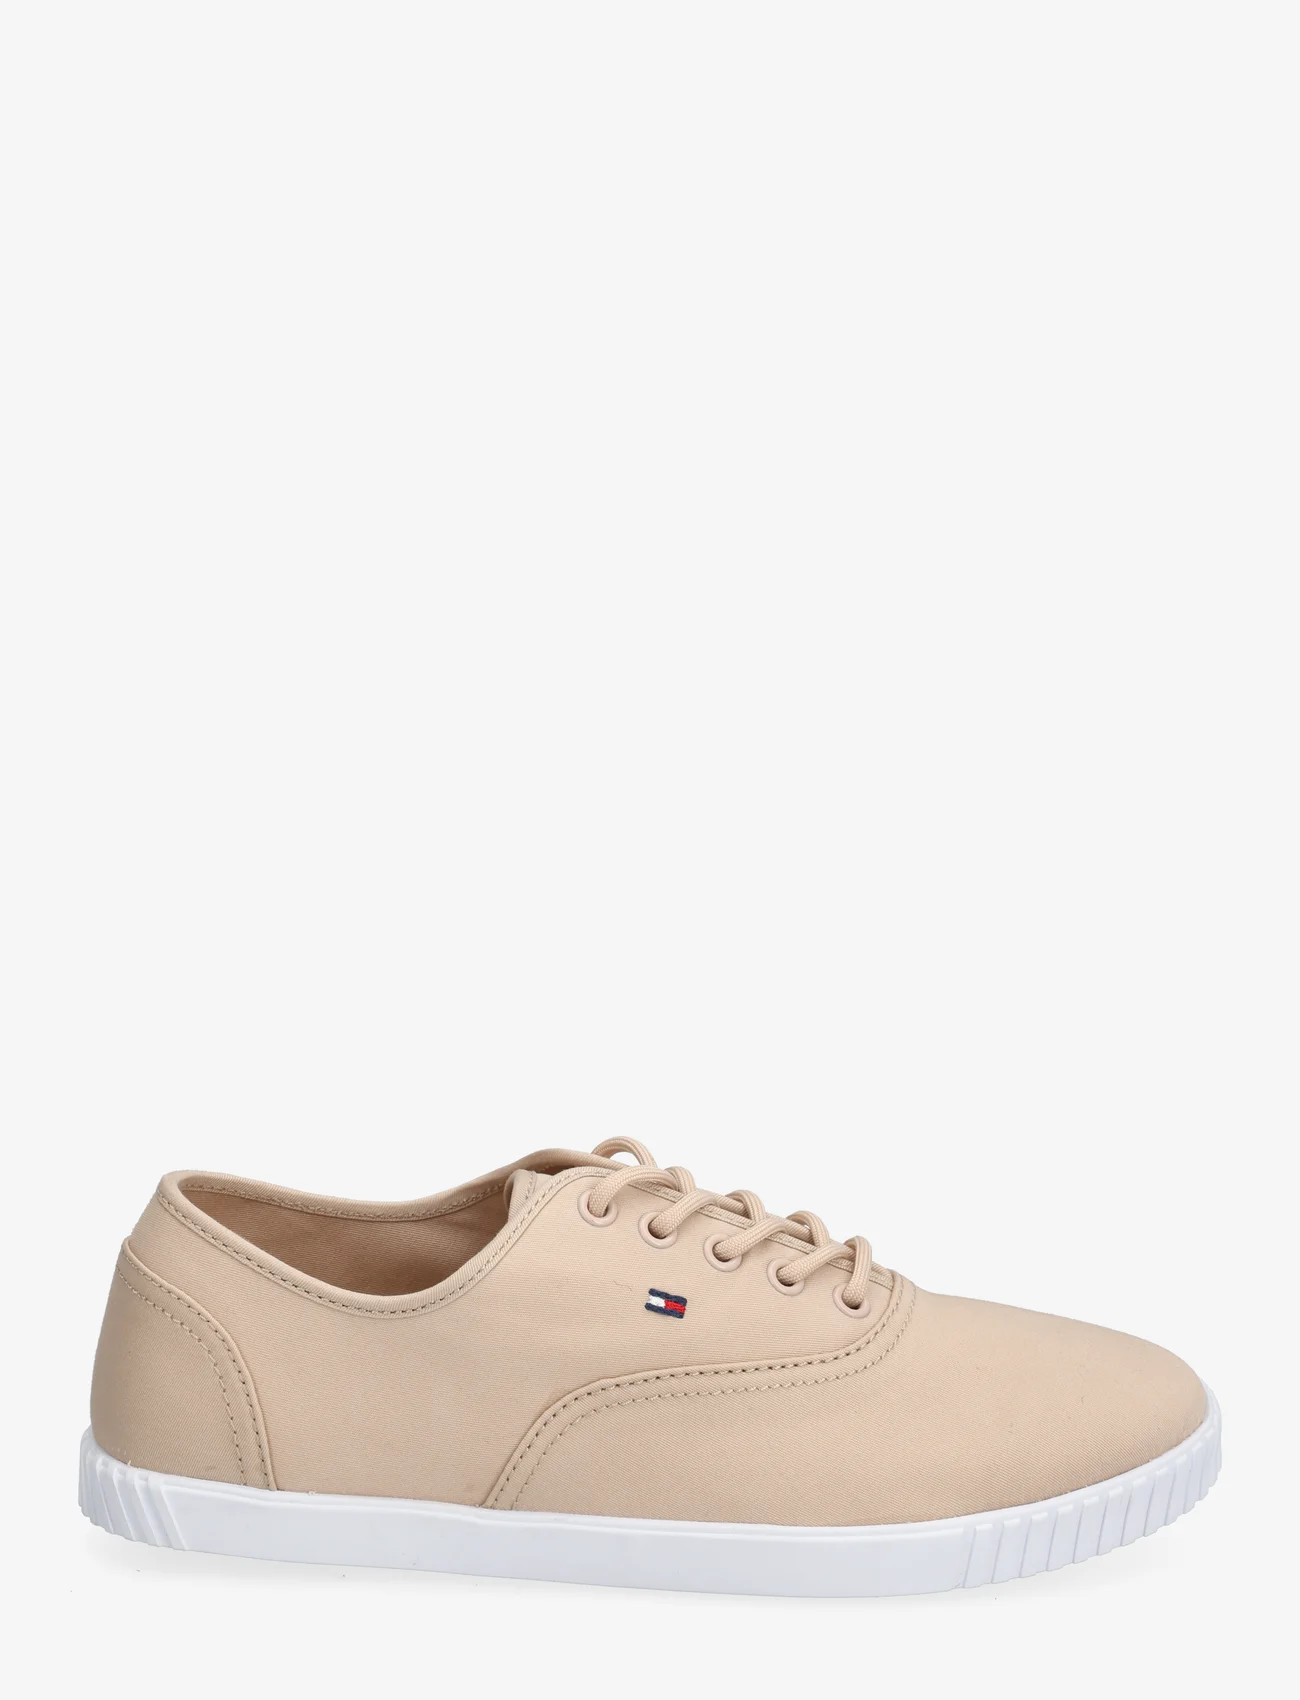 Tommy Hilfiger - CANVAS LACE UP SNEAKER - low top sneakers - misty blush - 1